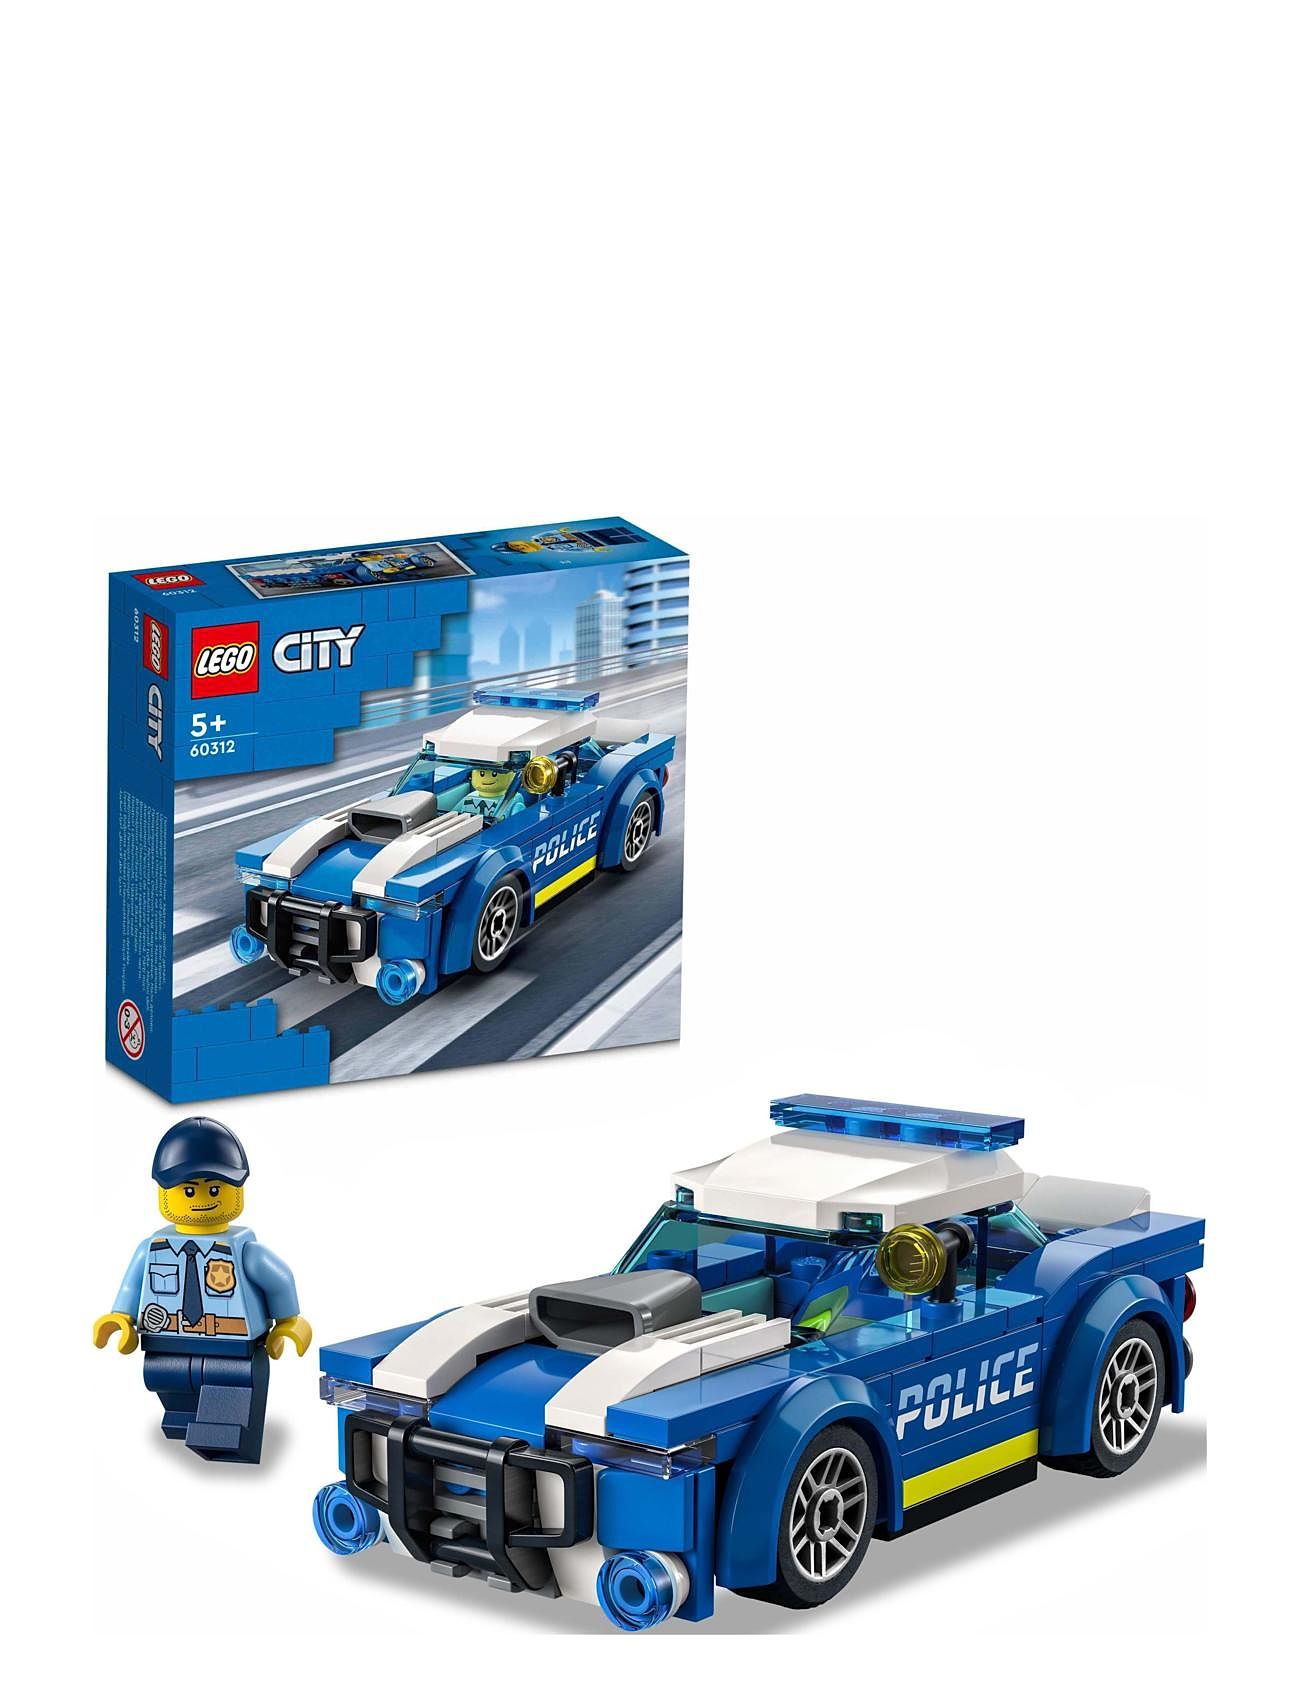 LEGO "Police Car Toy For Kids 5+ Years Old Toys Lego city Blue LEGO"